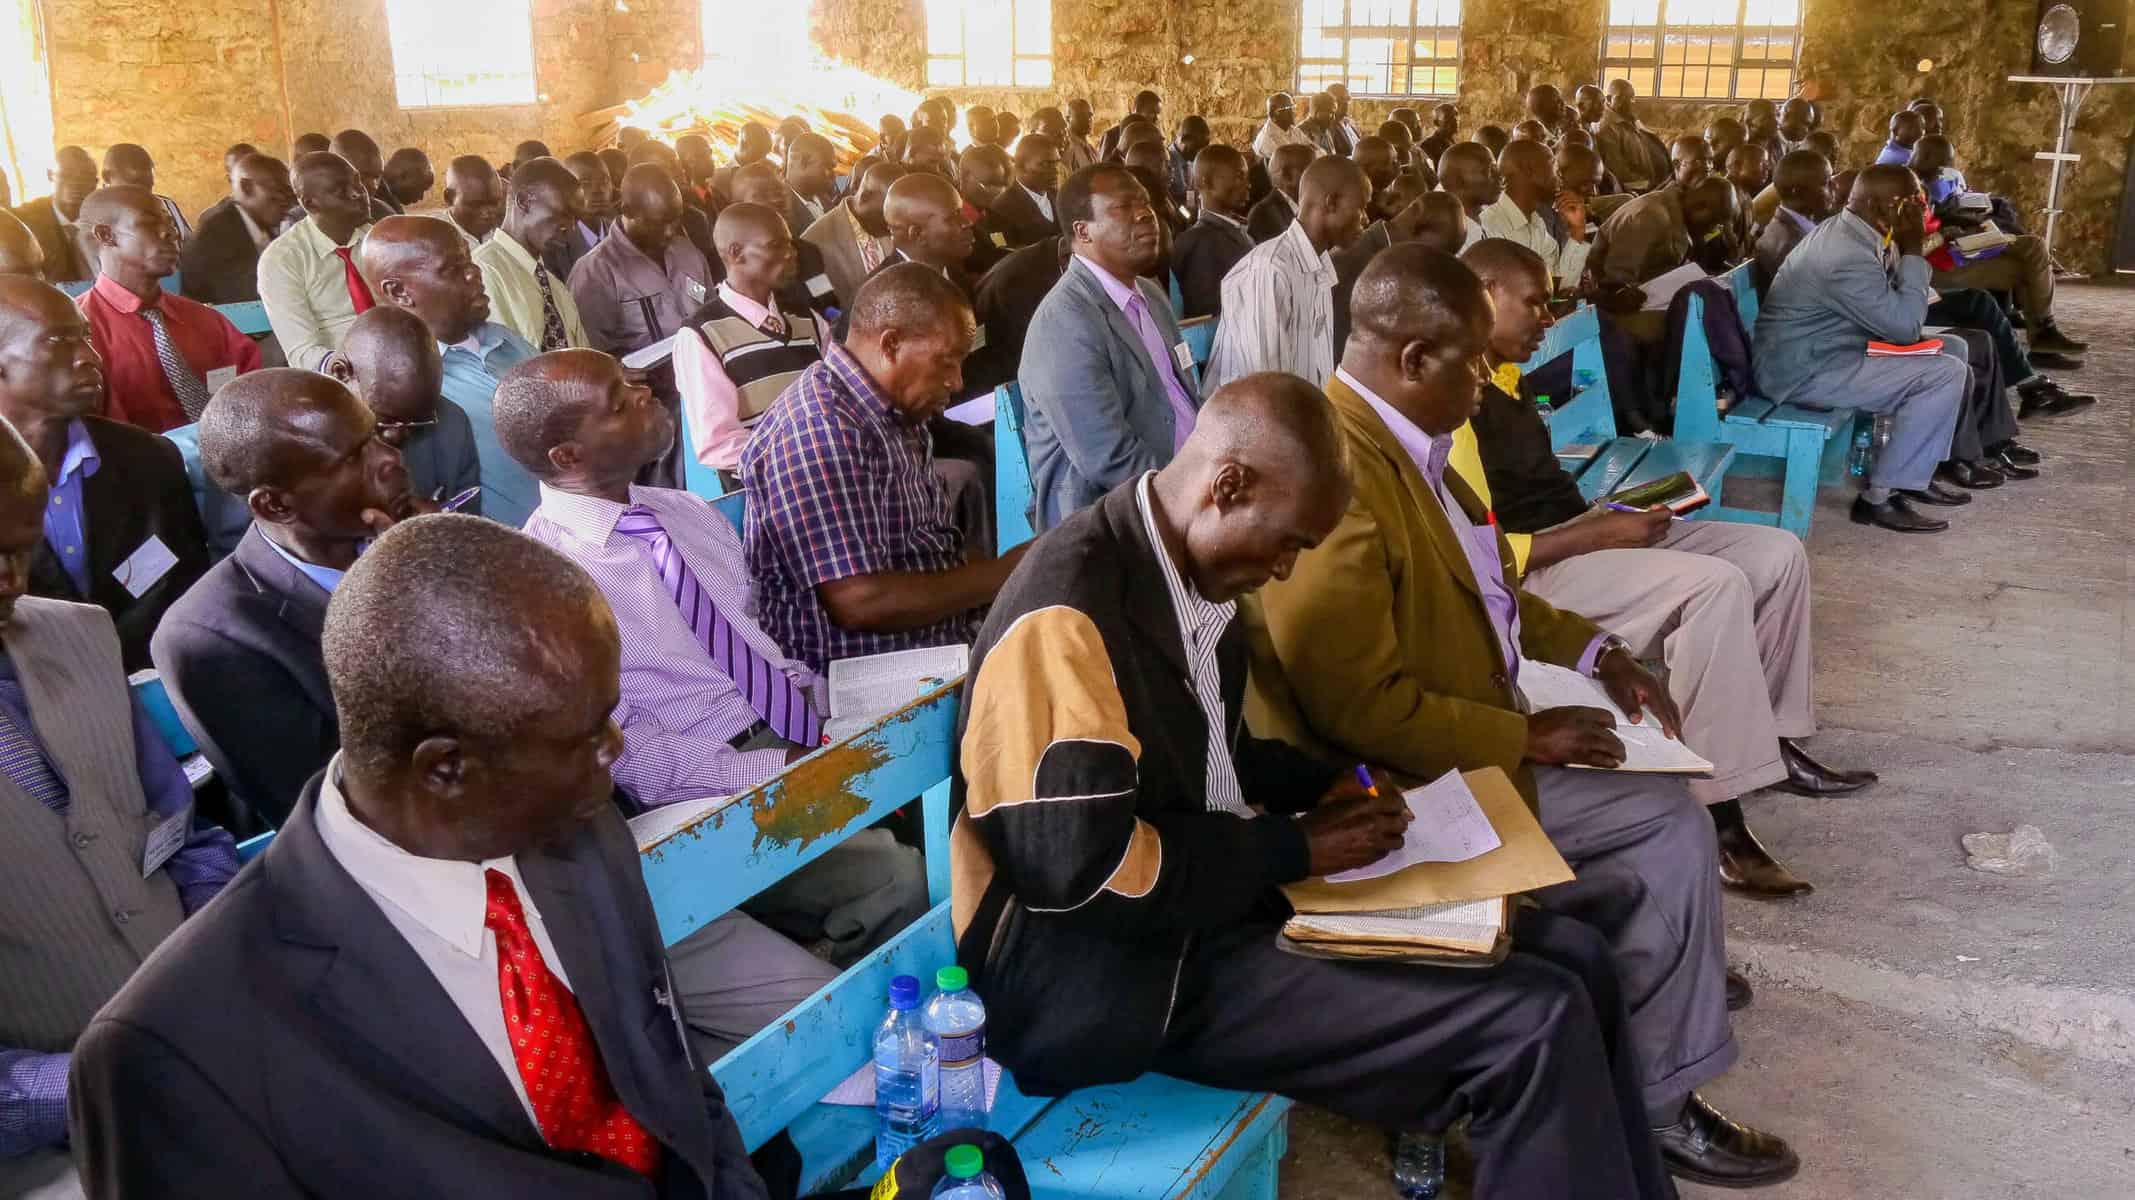 A group of Kenyan pastors sits attentively in a church, participating in a training session with open notebooks and Bibles, engaged in learning and discussion.